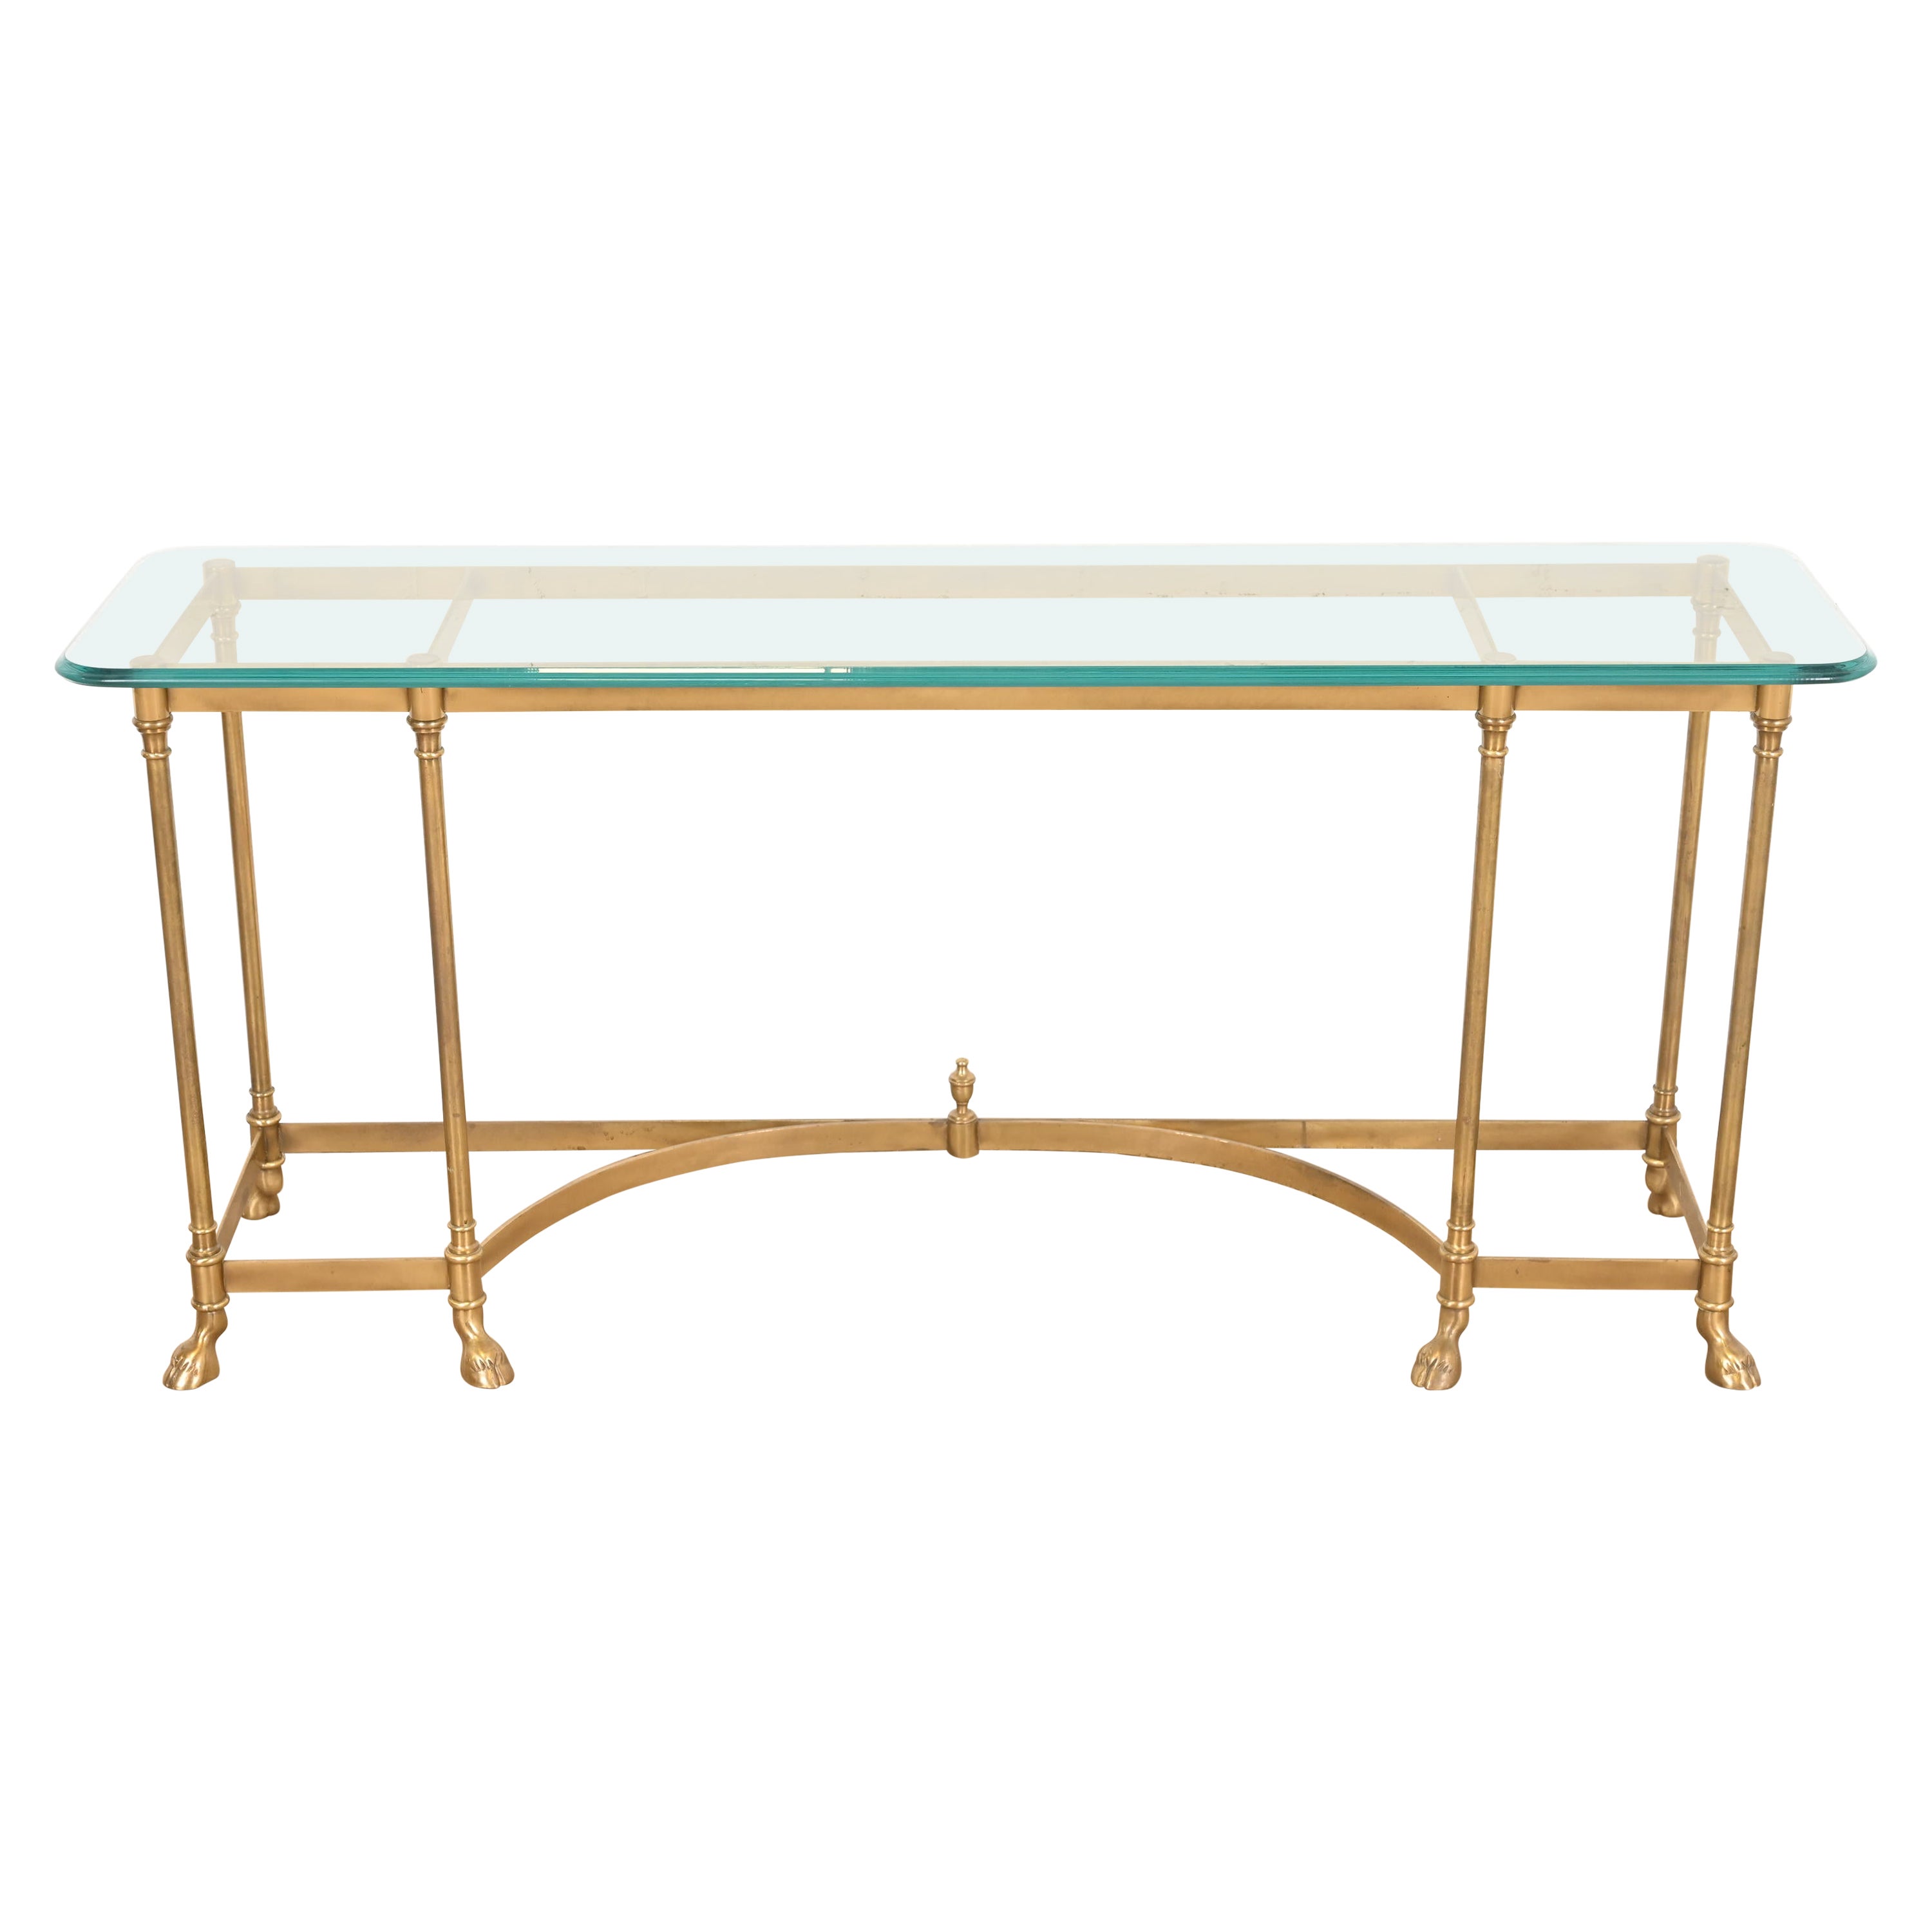 Labarge Hollywood Regency Brass and Glass Hooved Feet Console Table, Circa 1960s